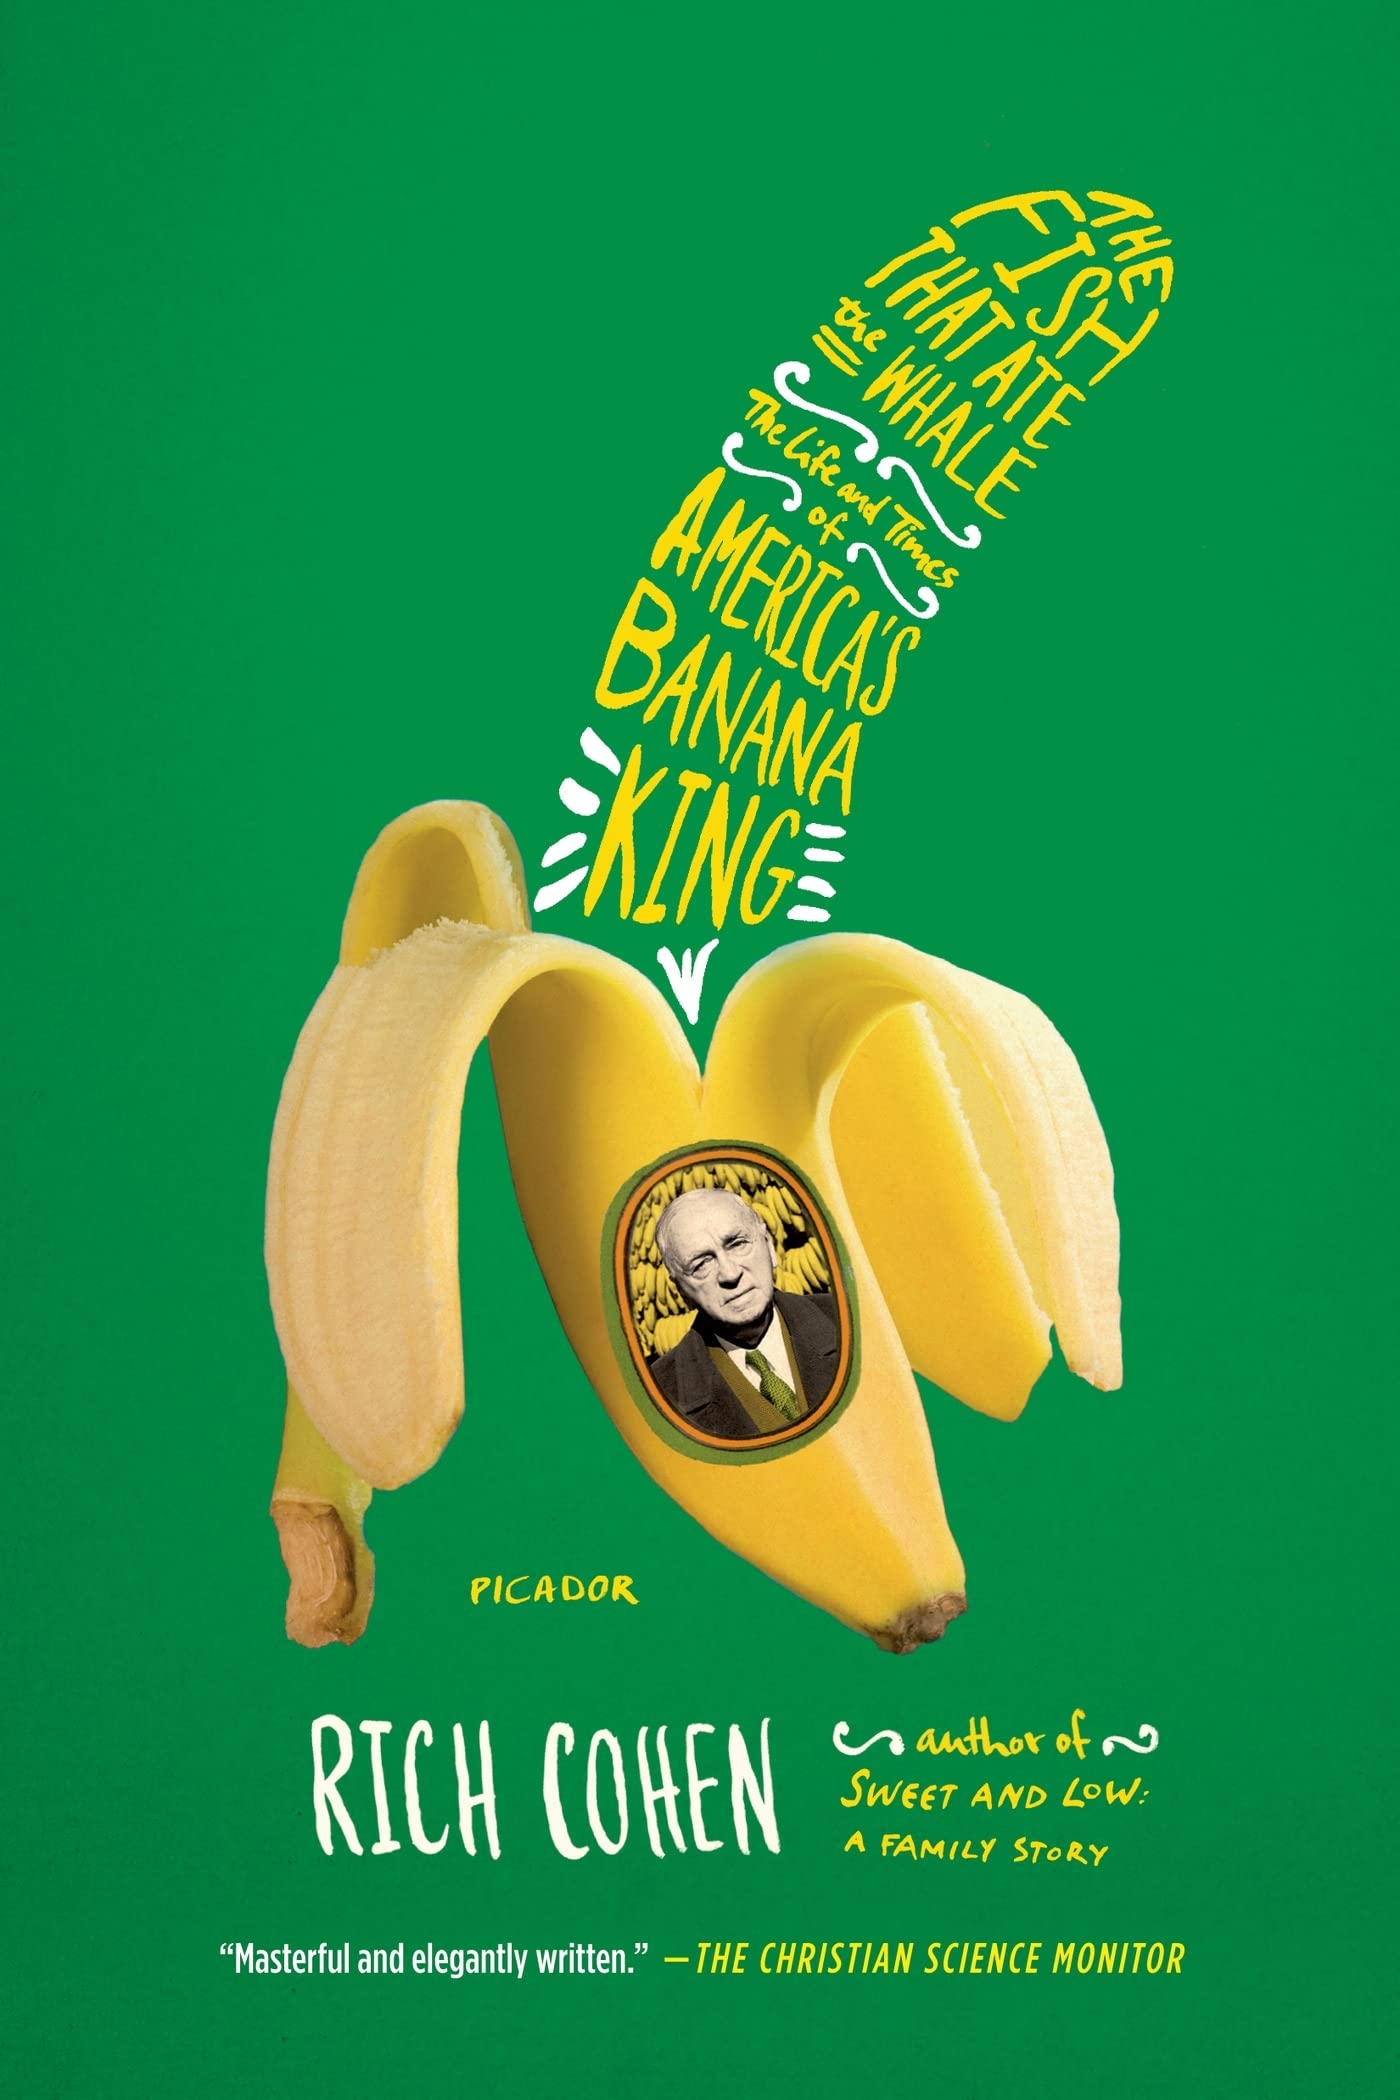 "The Fish That Ate The Whale: The Life & Times of America's Banana King" by Rich Cohen.